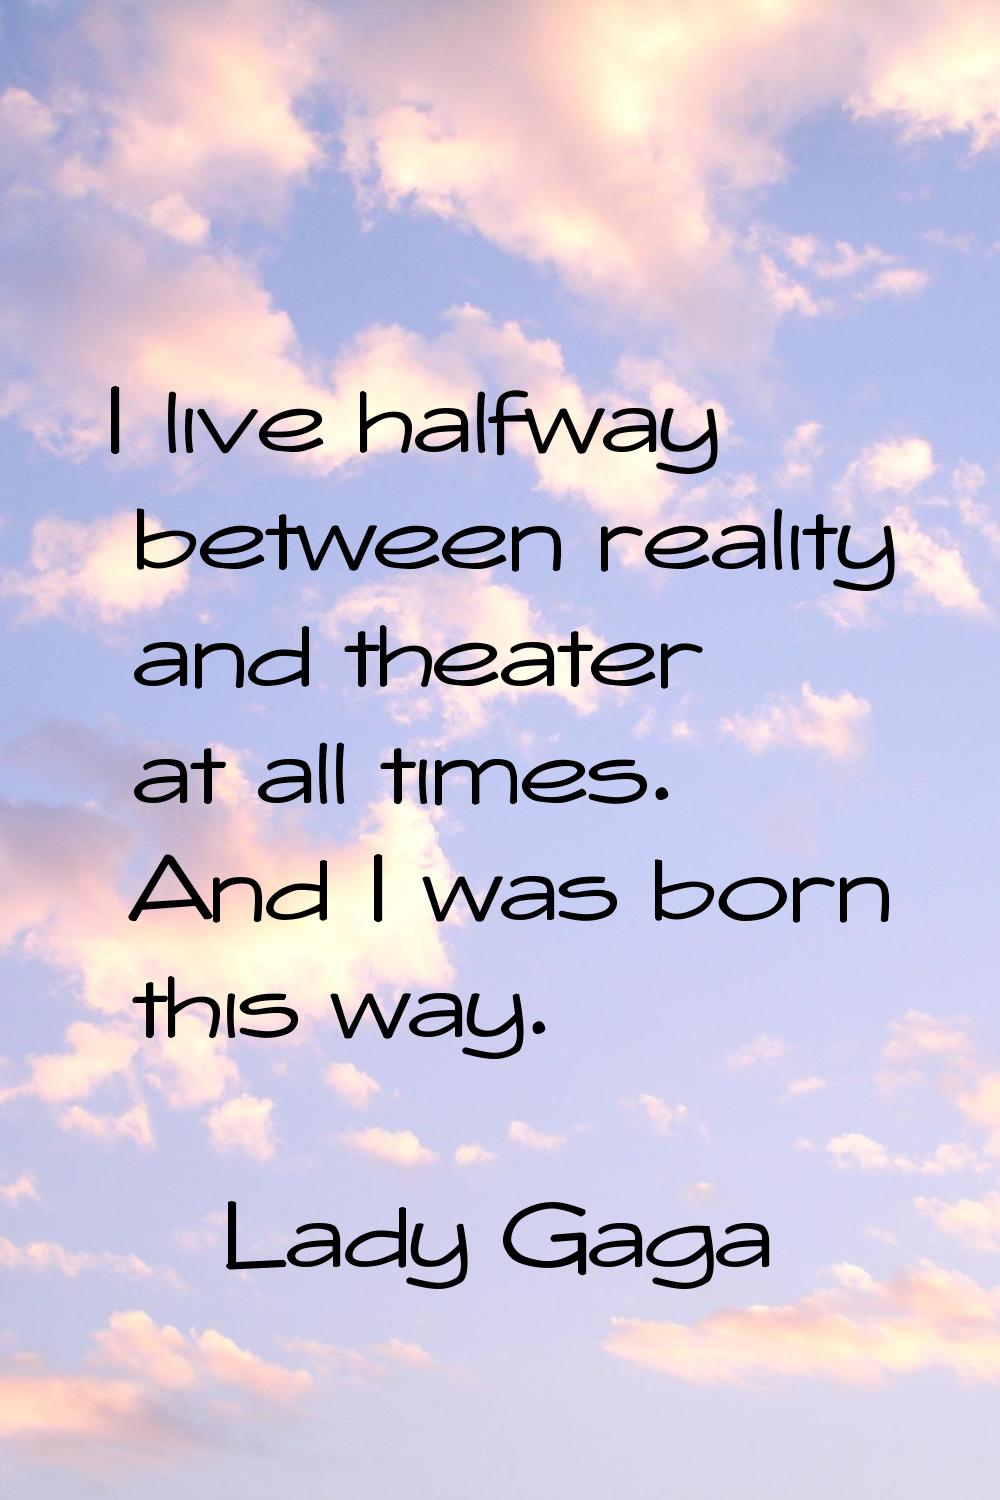 I live halfway between reality and theater at all times. And I was born this way.